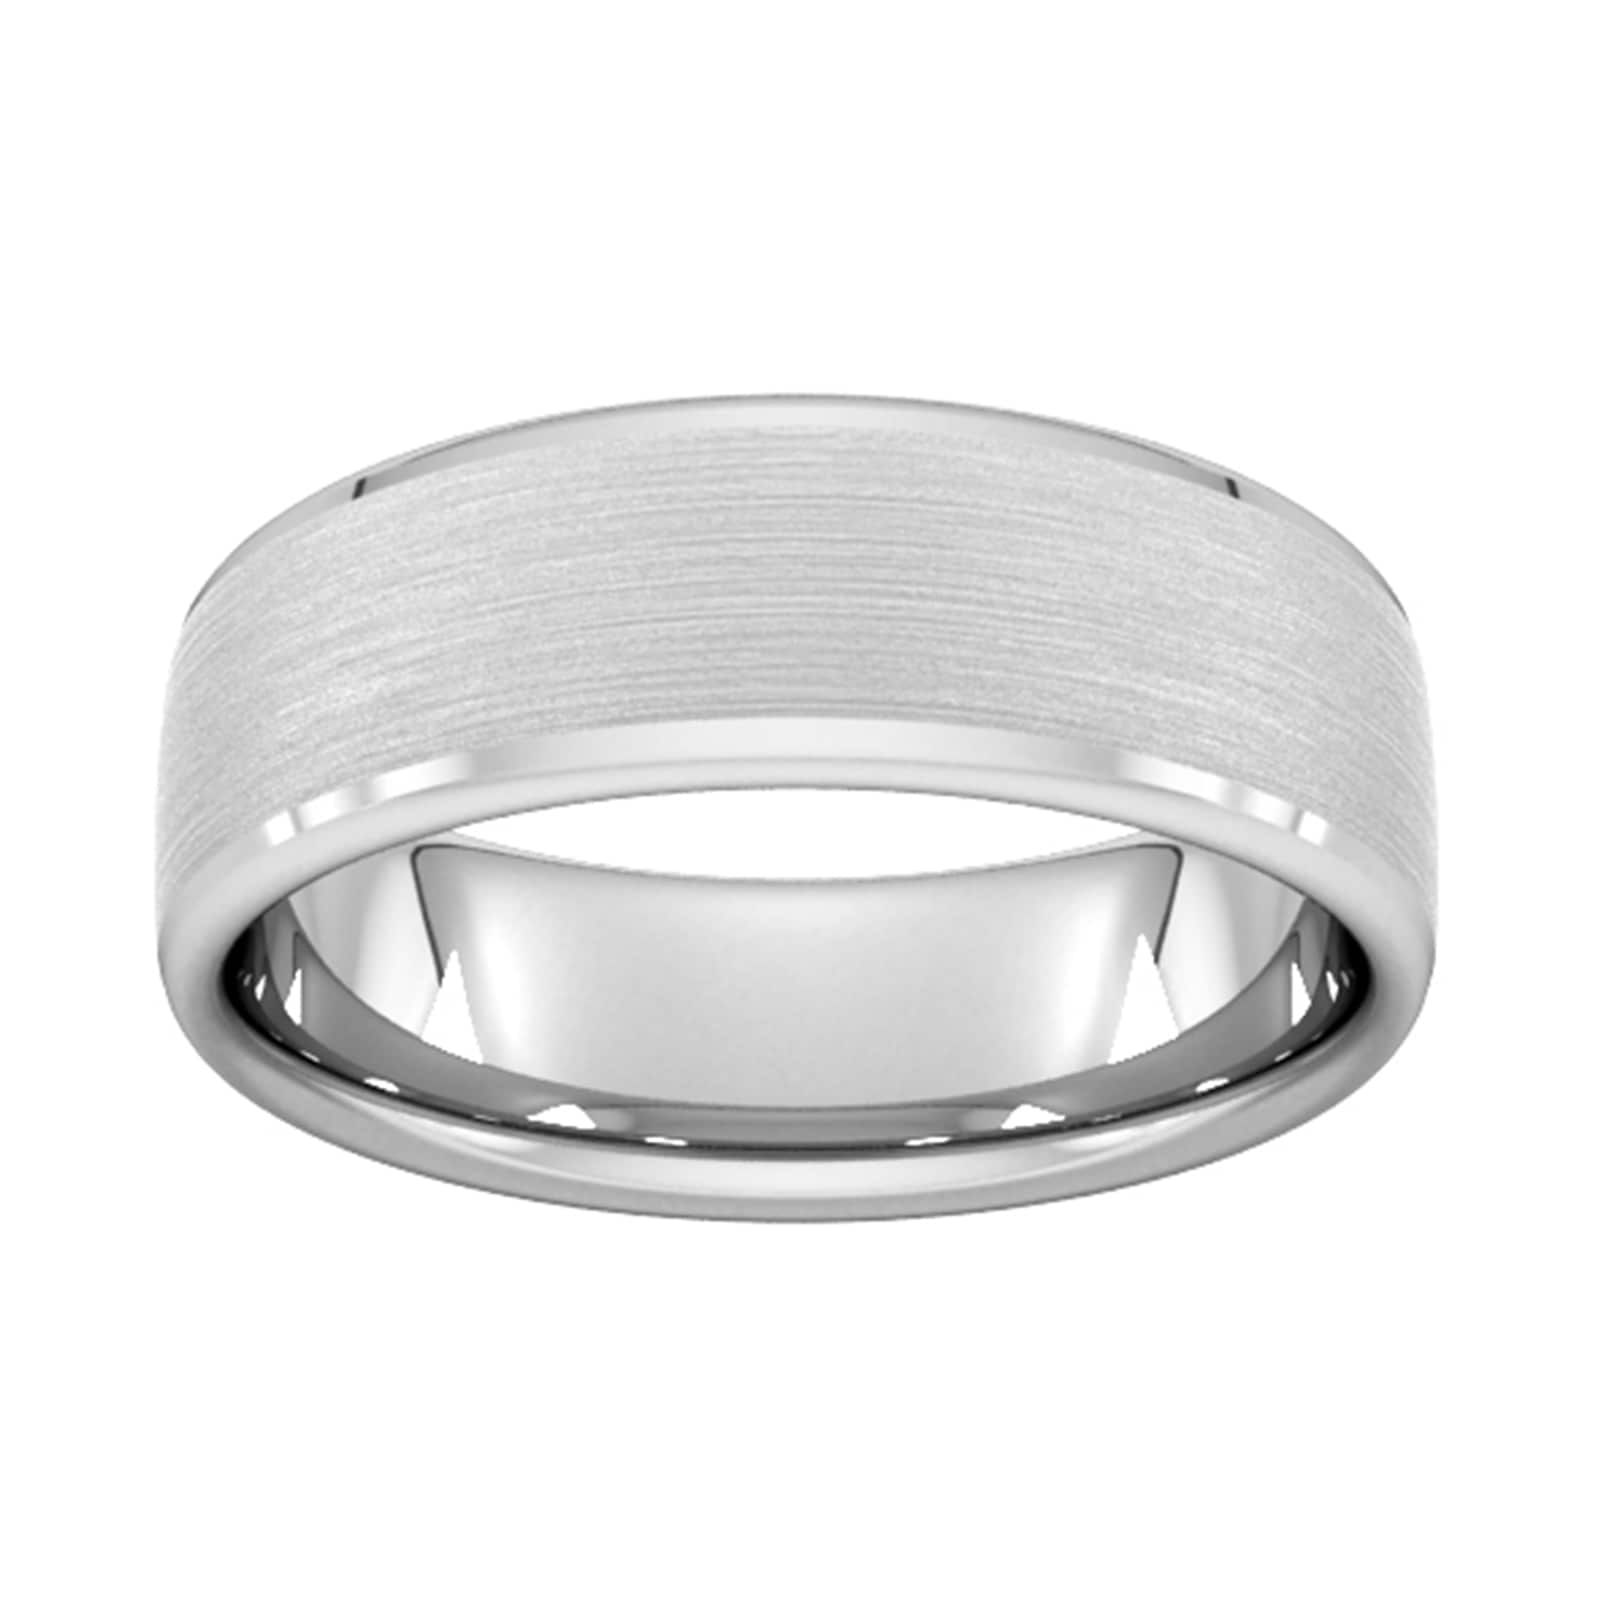 7mm D Shape Standard Polished Chamfered Edges With Matt Centre Wedding Ring In 18 Carat White Gold - Ring Size S